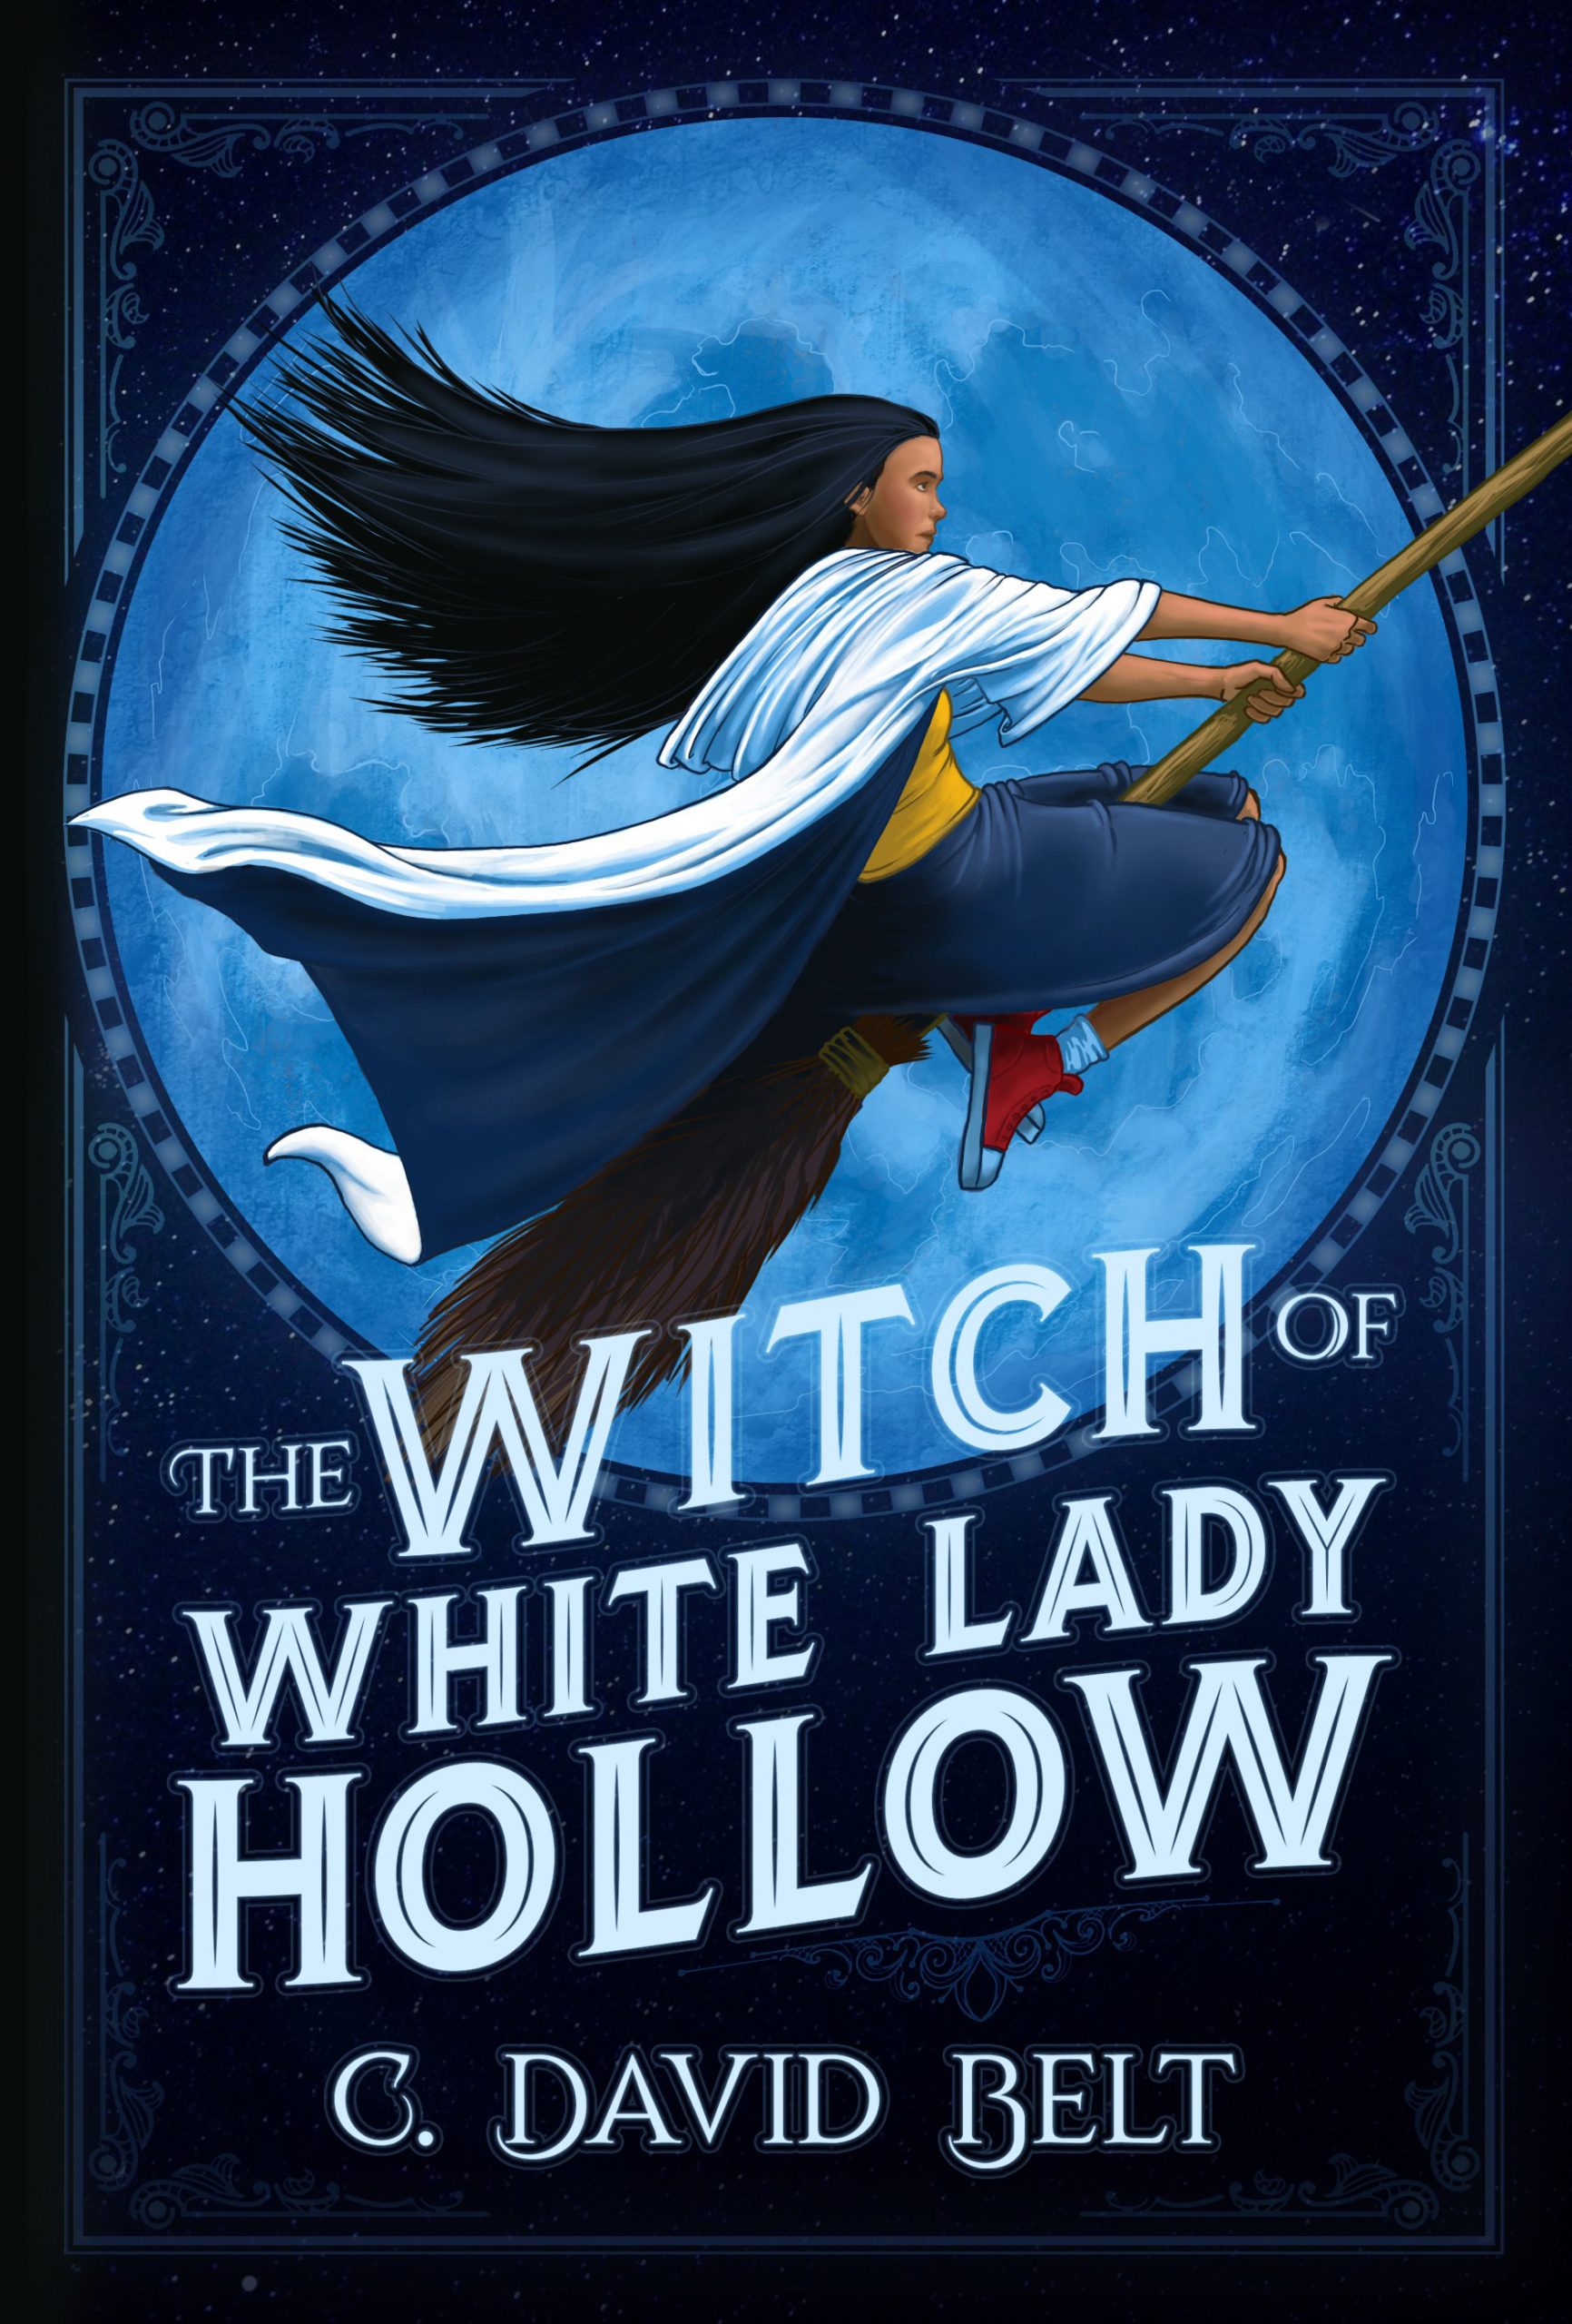 Book cover, witch flying on broom in front of moon with text The Witch of White Lady Hollow